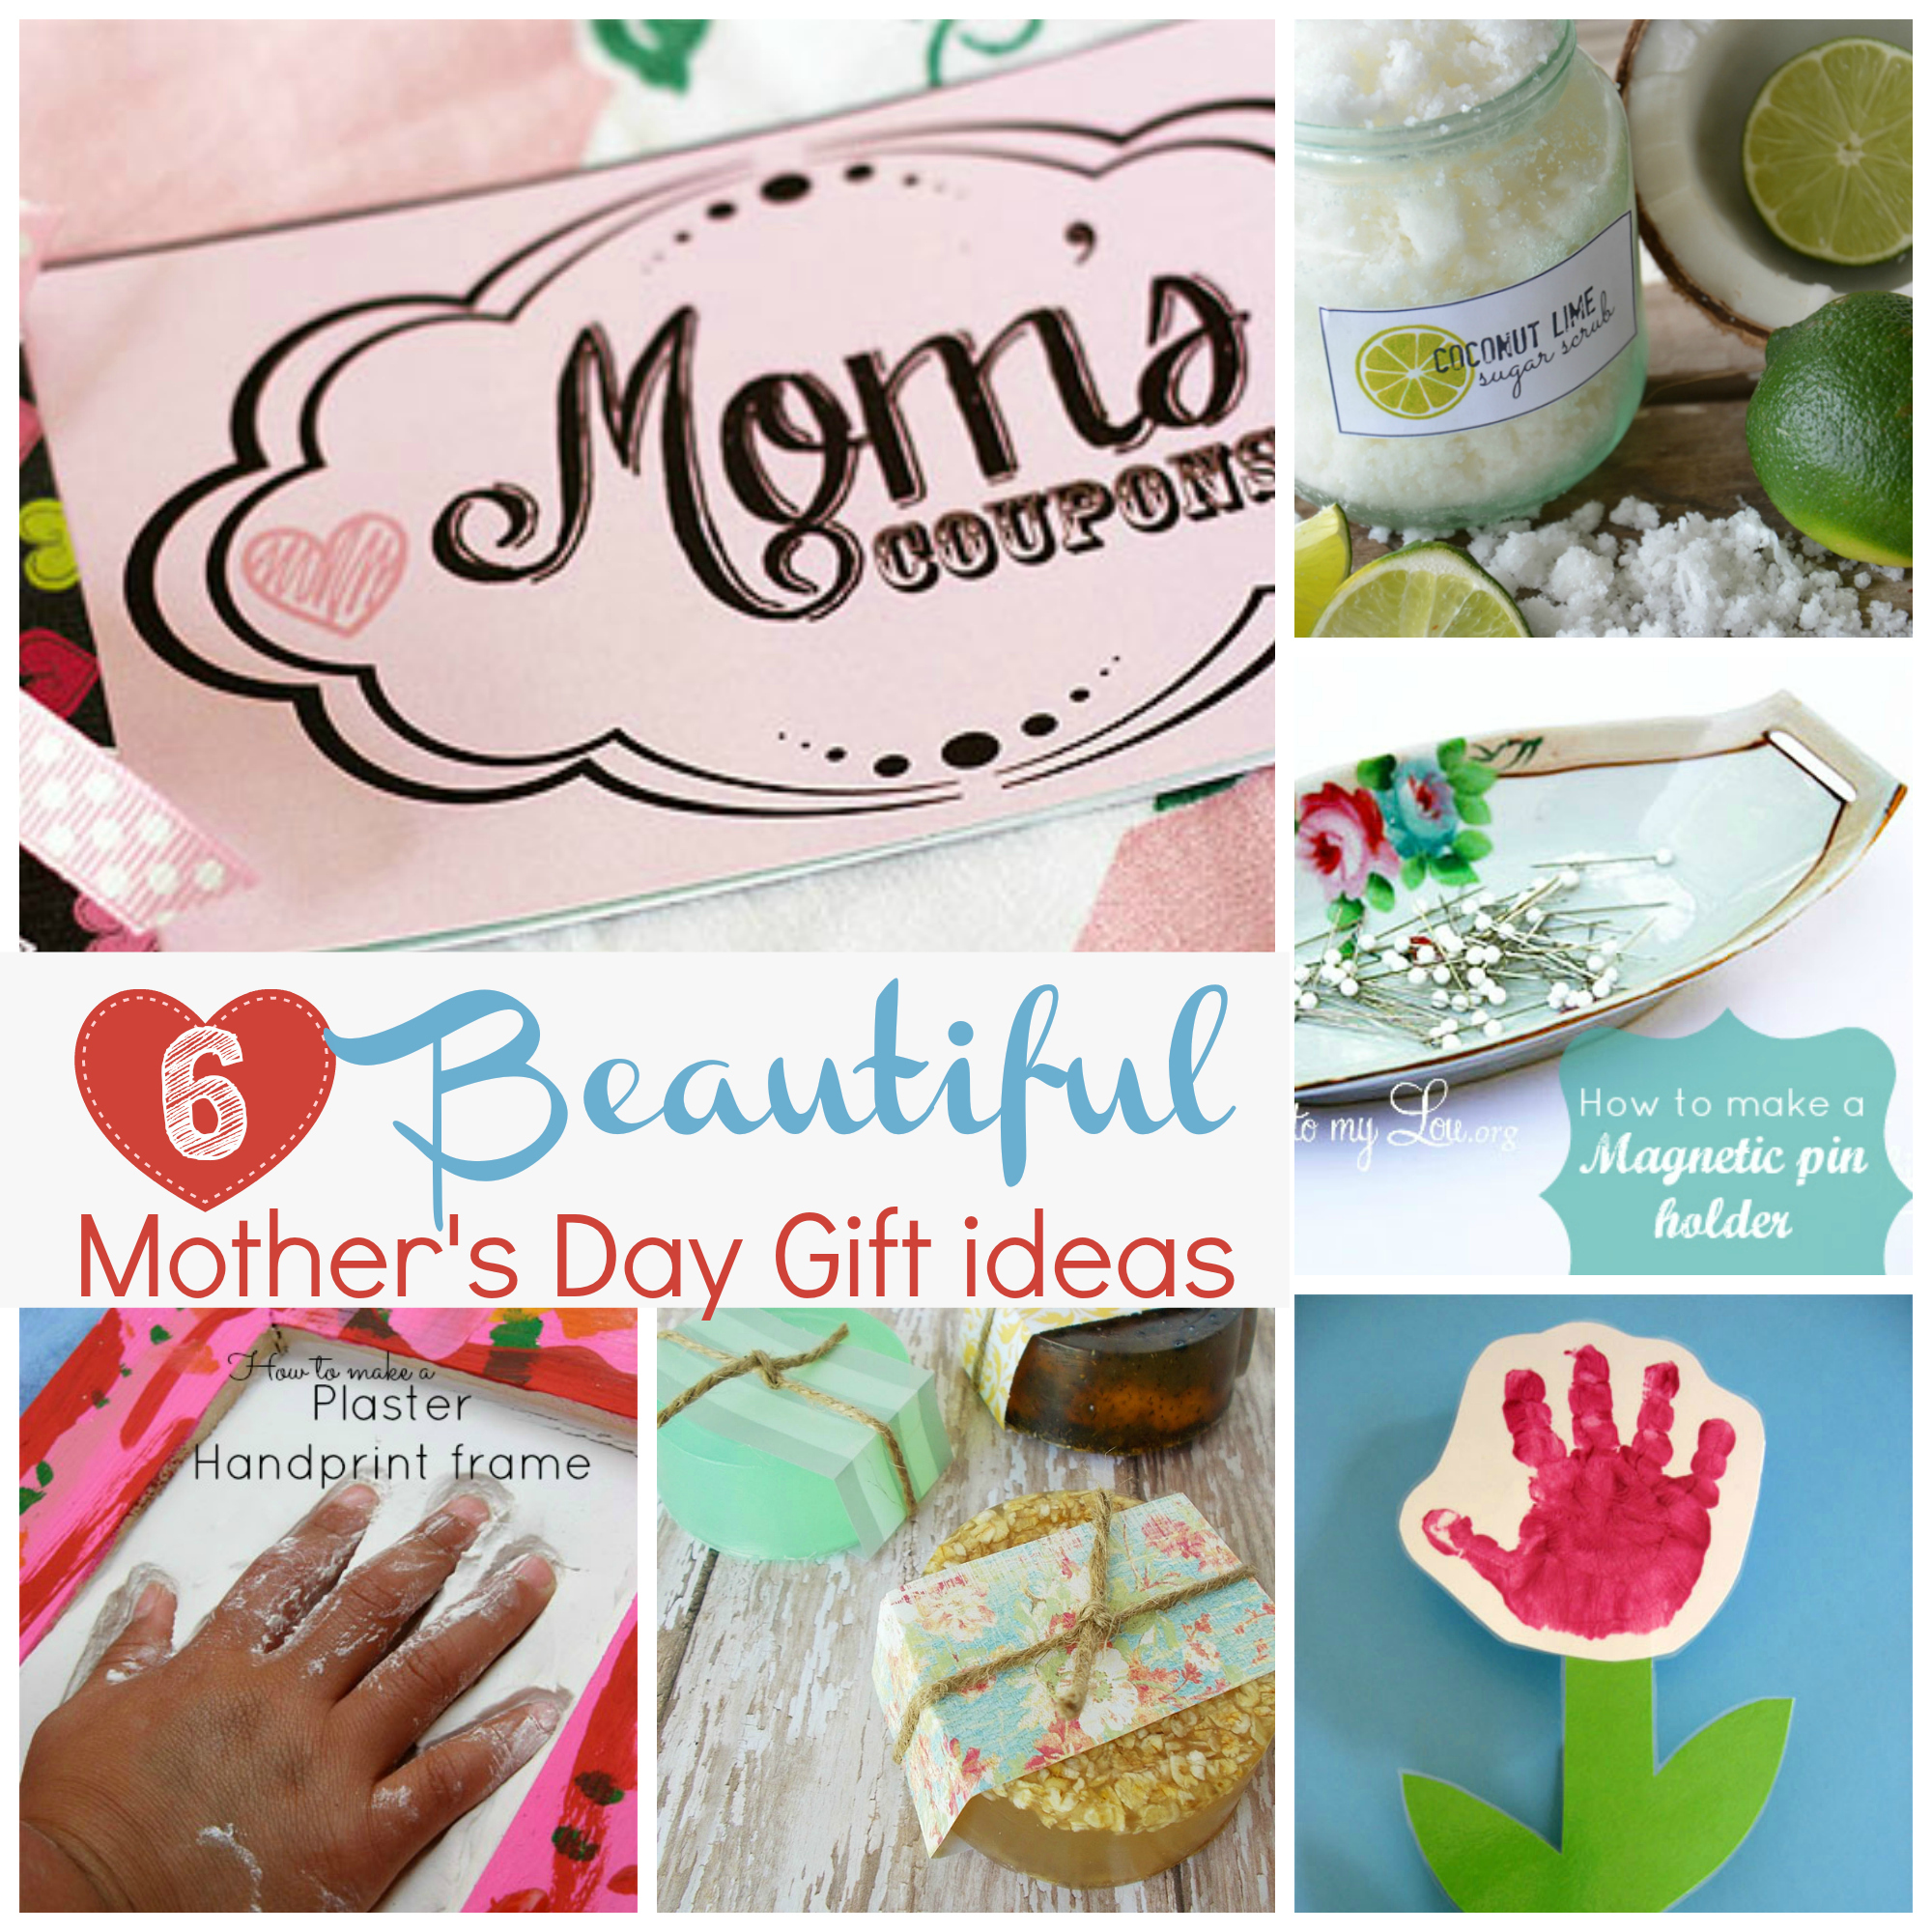 Handmade gift ideas for Mother's Day.